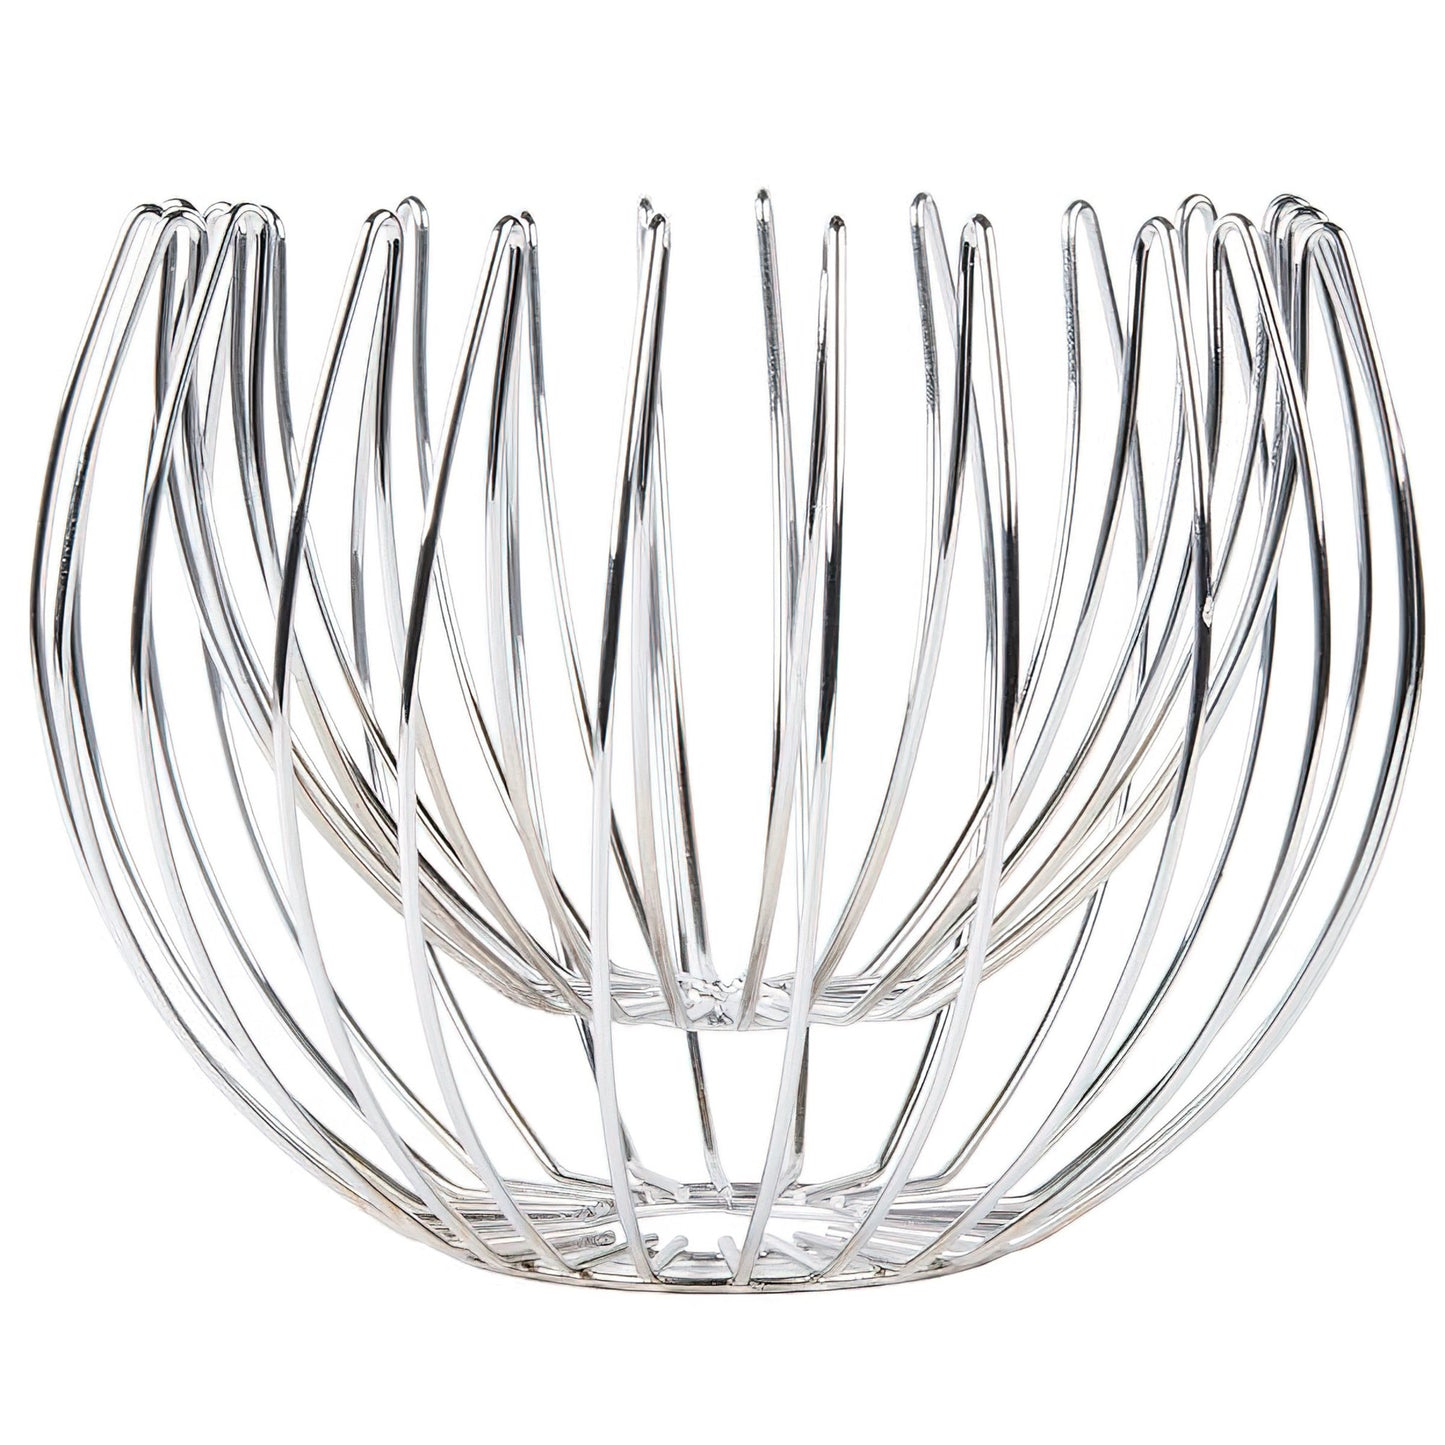 19" Suspended Chrome Wire Basket, 11.5" Tall